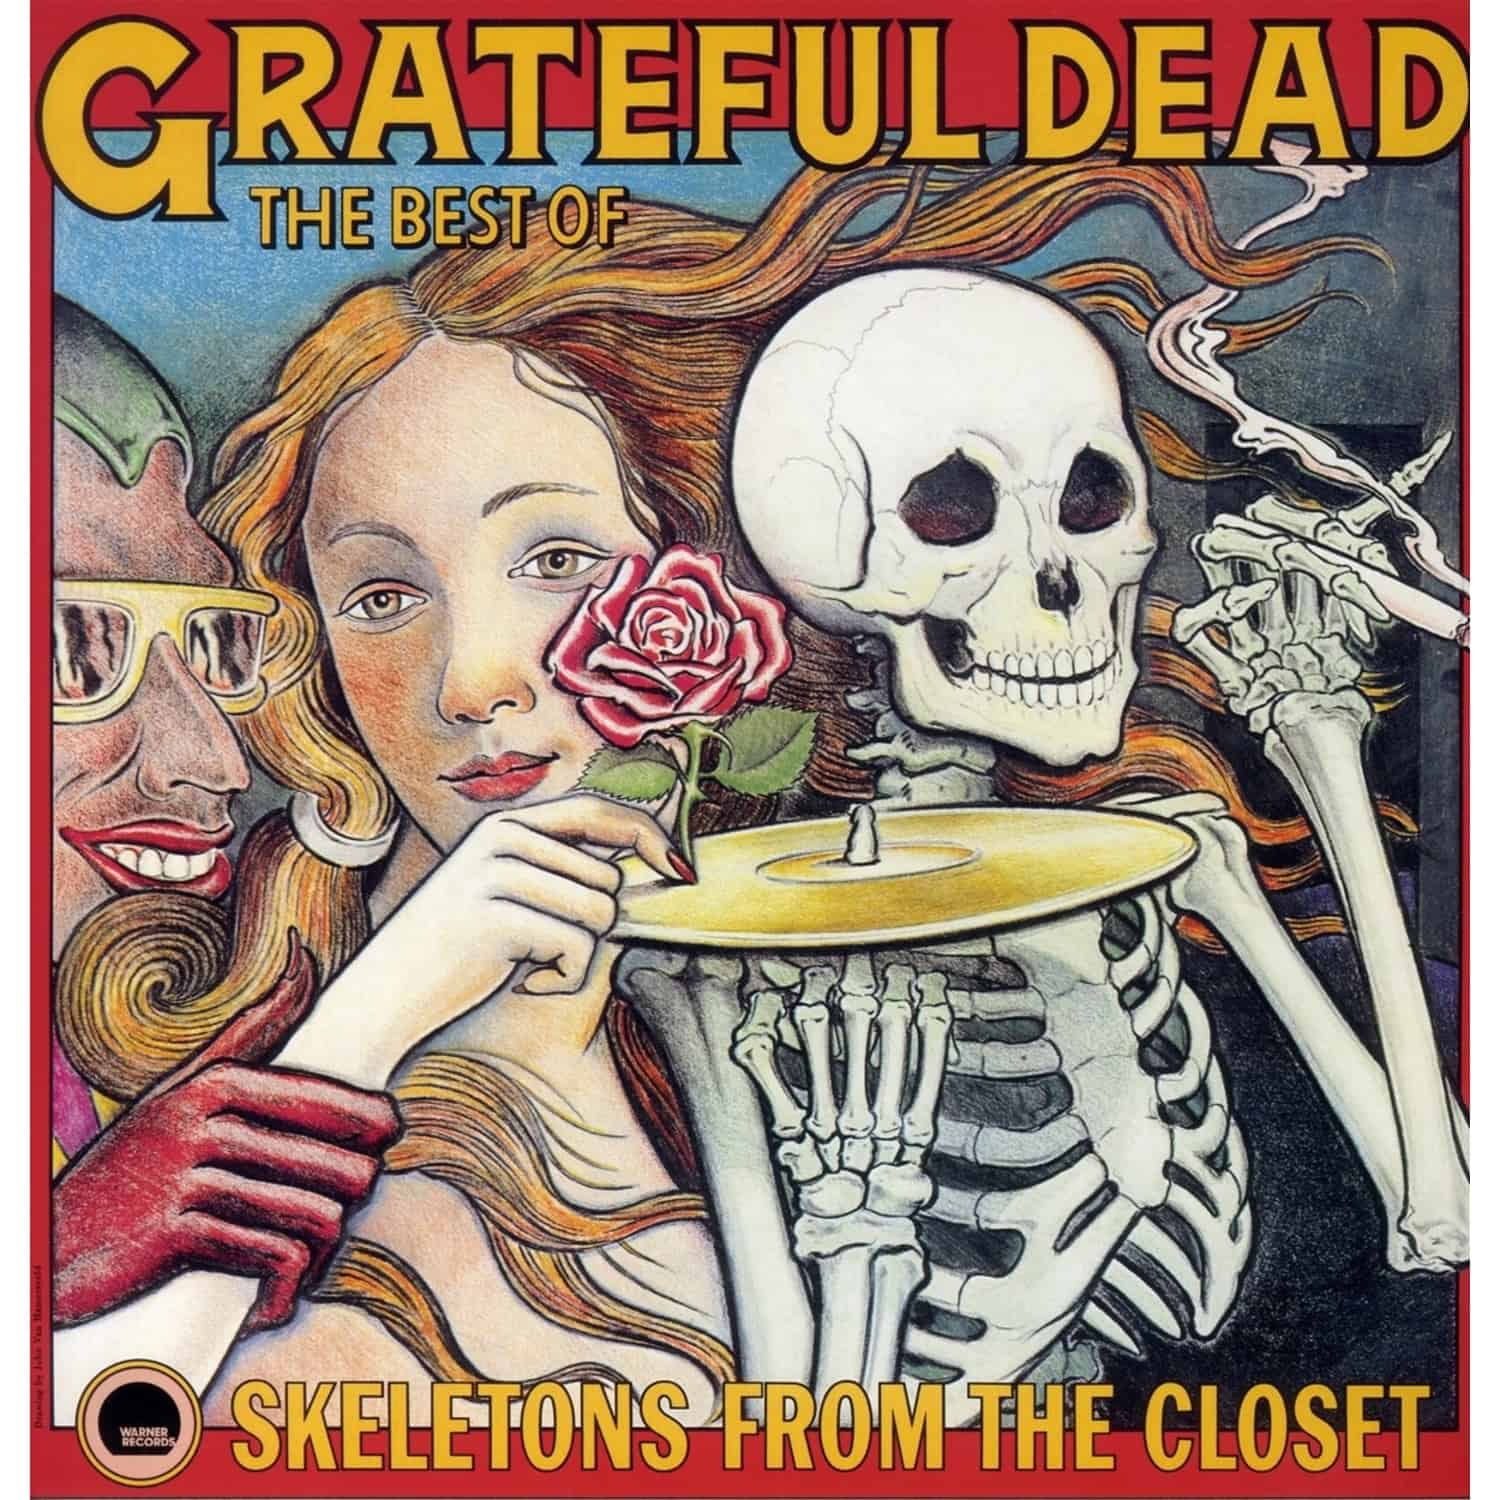 Grateful Dead - THE BEST OF: SKELETONS FROM THE CLOSET 